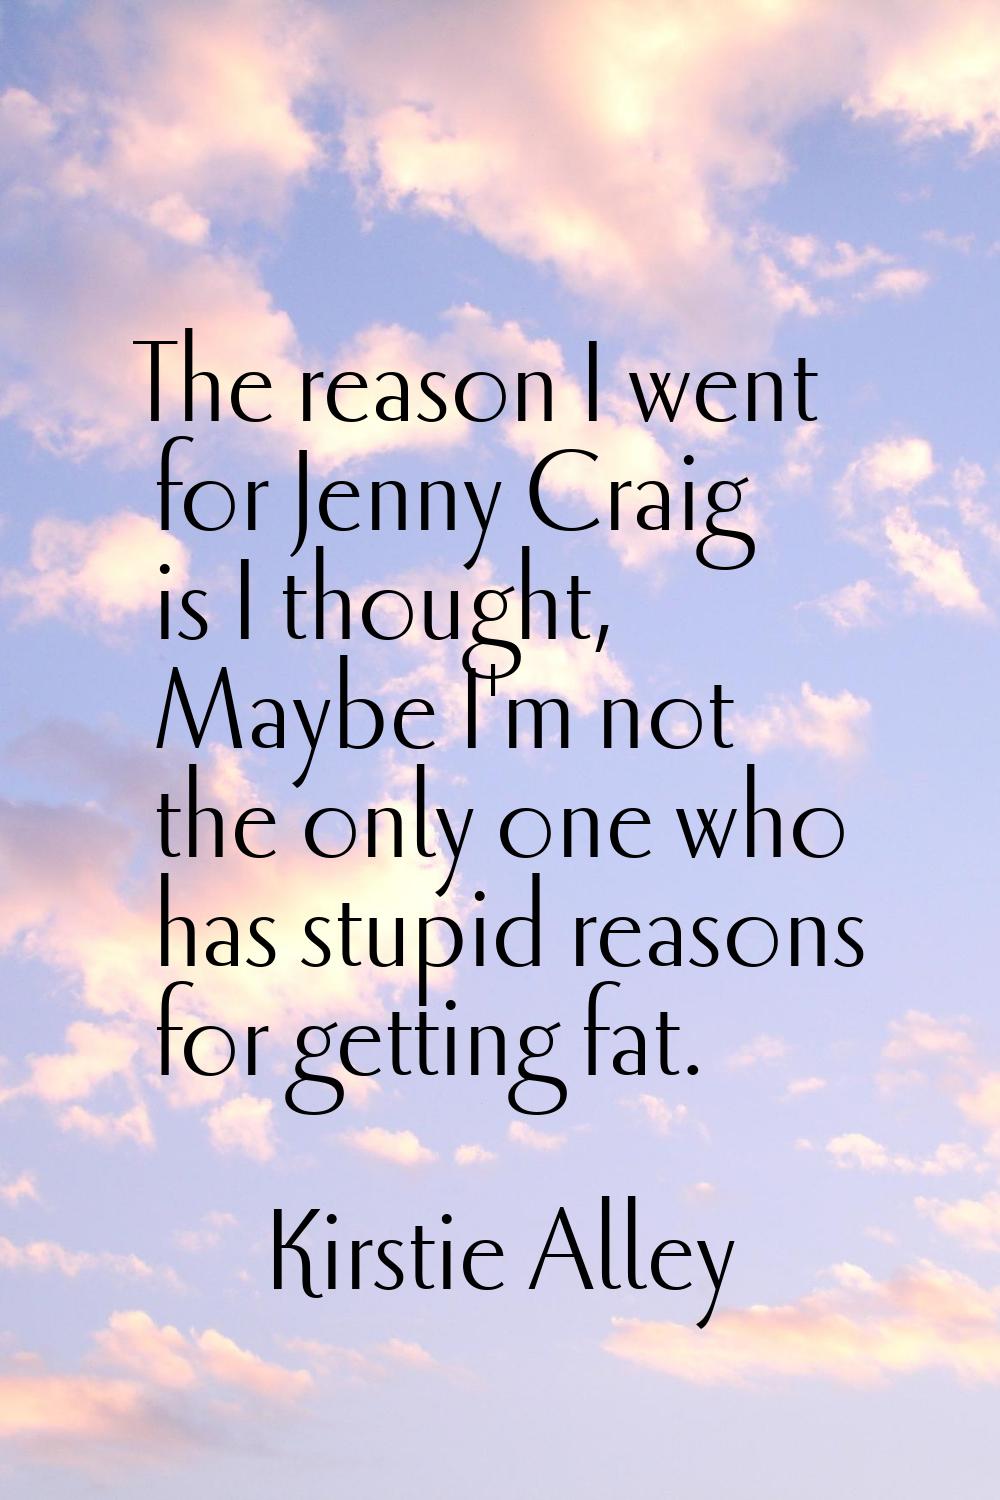 The reason I went for Jenny Craig is I thought, Maybe I'm not the only one who has stupid reasons f